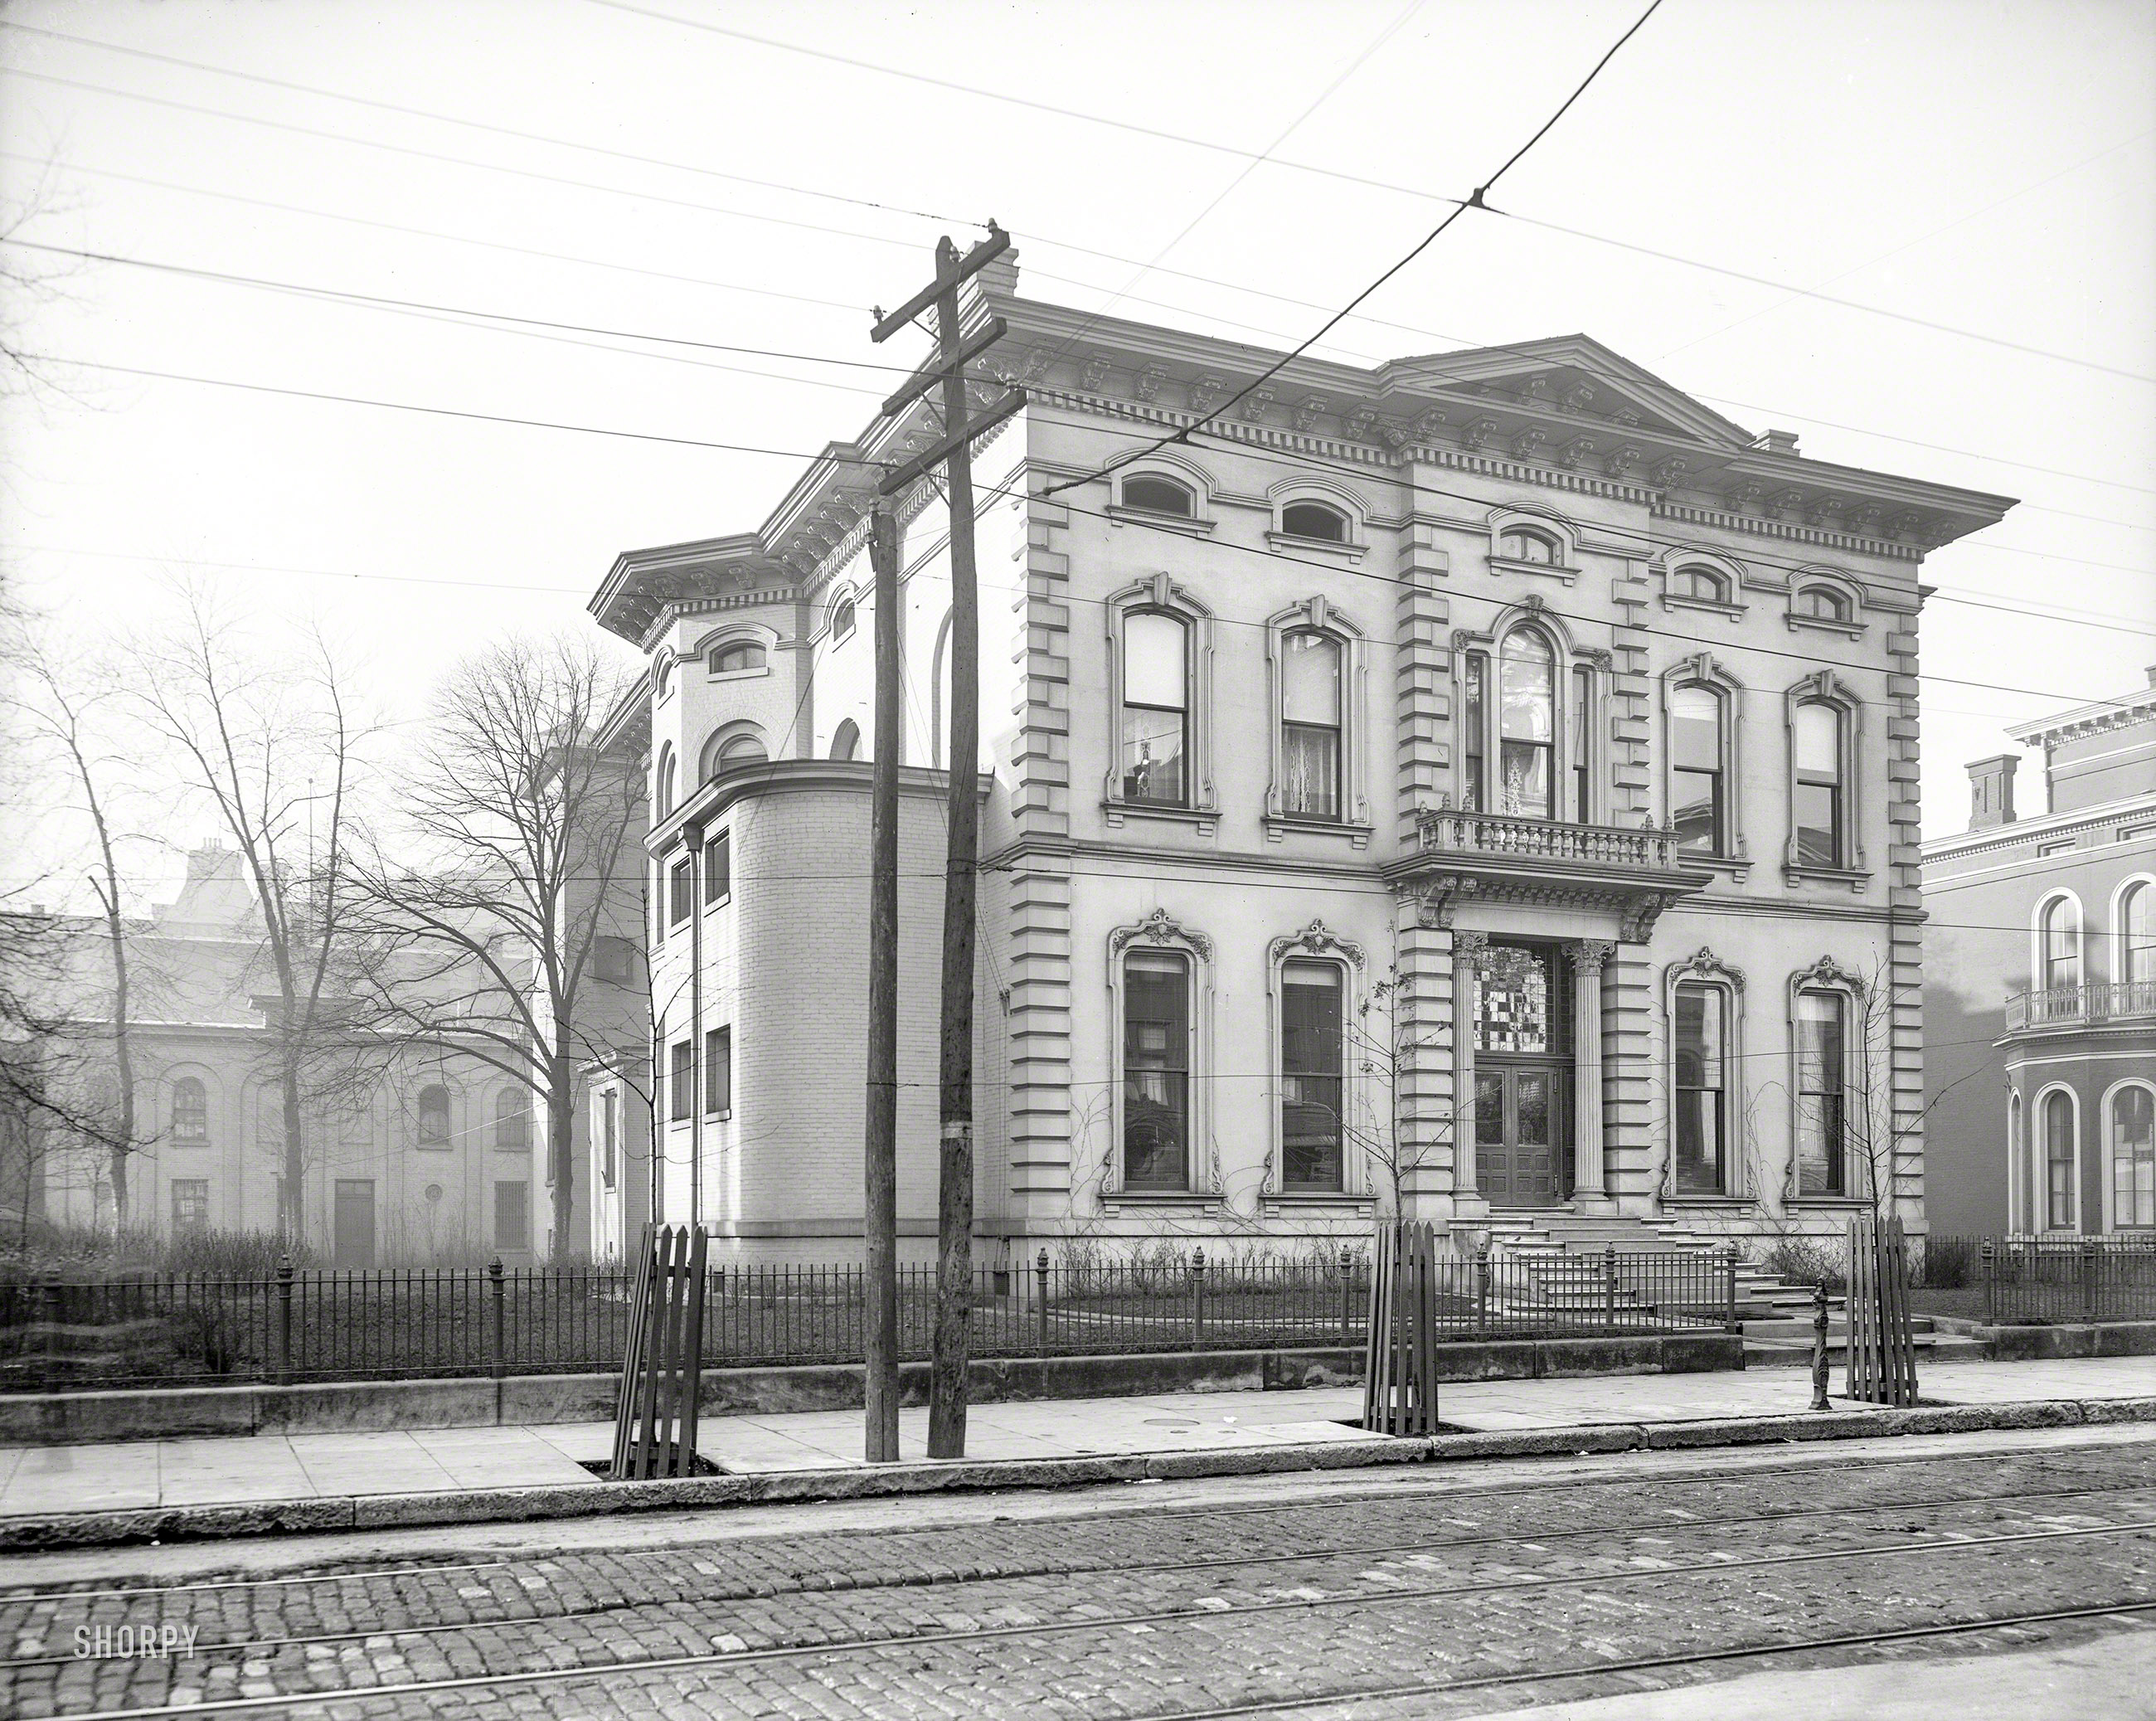 &nbsp; &nbsp; &nbsp; &nbsp; Birthplace of the Old-Fashioned, the Pendennis Club, established in 1881 as a "private club for white gentlemen of high social standing," took its name from Thackeray's novel "Pendennis."
Louisville, Kentucky, circa 1906. "Pendennis Club, West Walnut Street." 8x10 inch dry plate glass negative, Detroit Publishing Company. View full size.